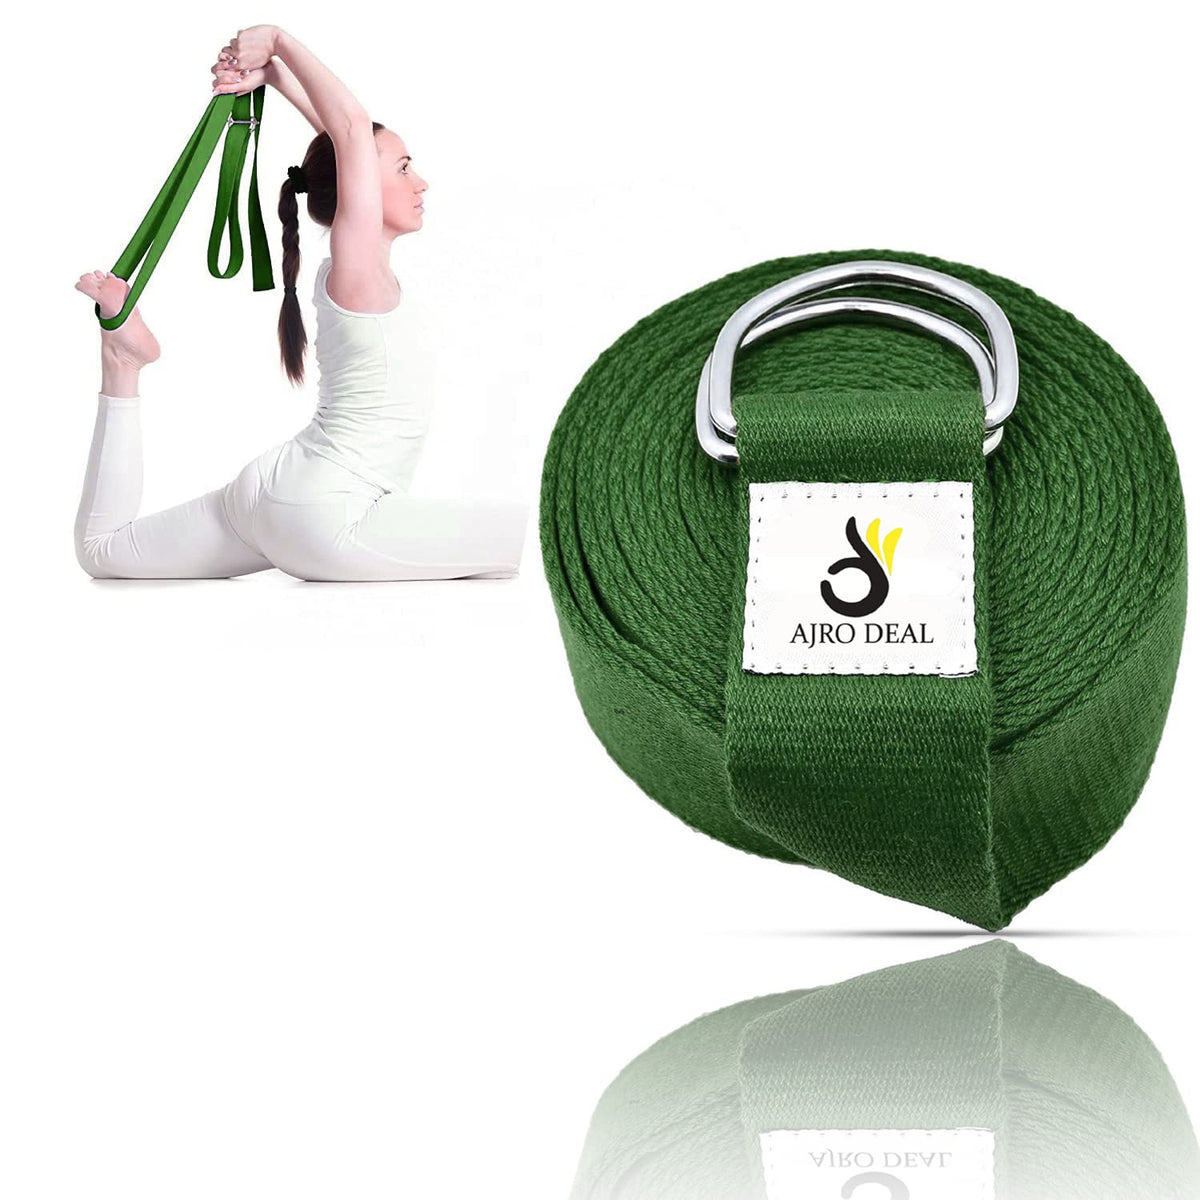 Cotton Yoga Strap/Belt with Extra Safe Adjustable D-Ring Buckle for  Pilates, Gym Workouts, Physical Therapy, Improves Sitting Posture for Women  & Men